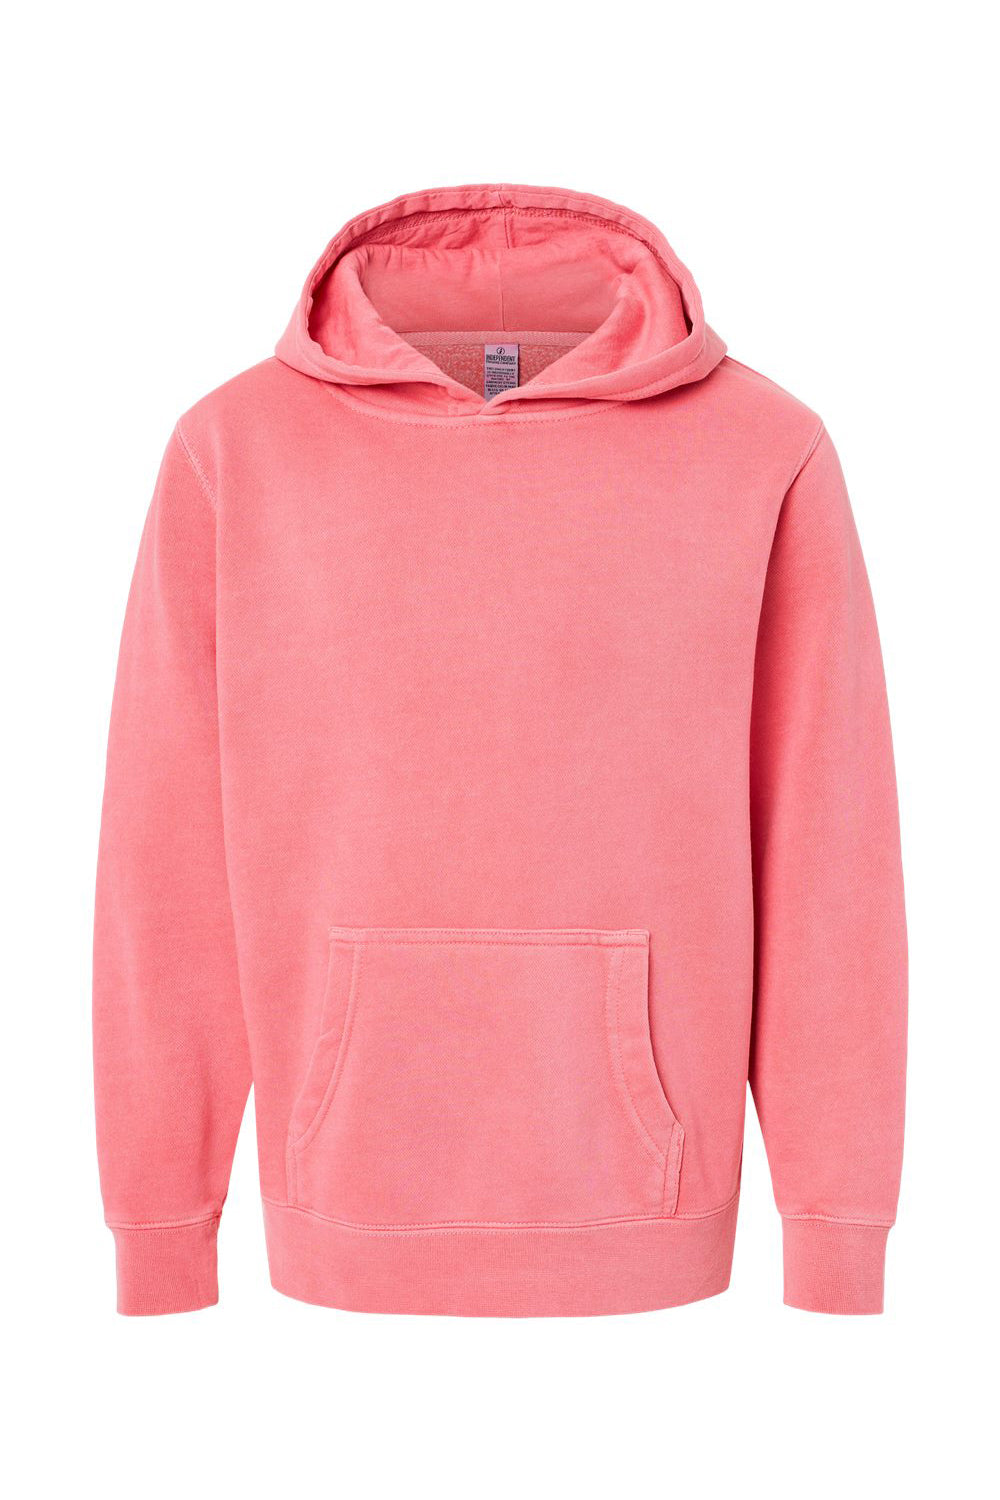 Independent Trading Co. PRM1500Y Youth Pigment Dyed Hooded Sweatshirt Hoodie Pink Flat Front